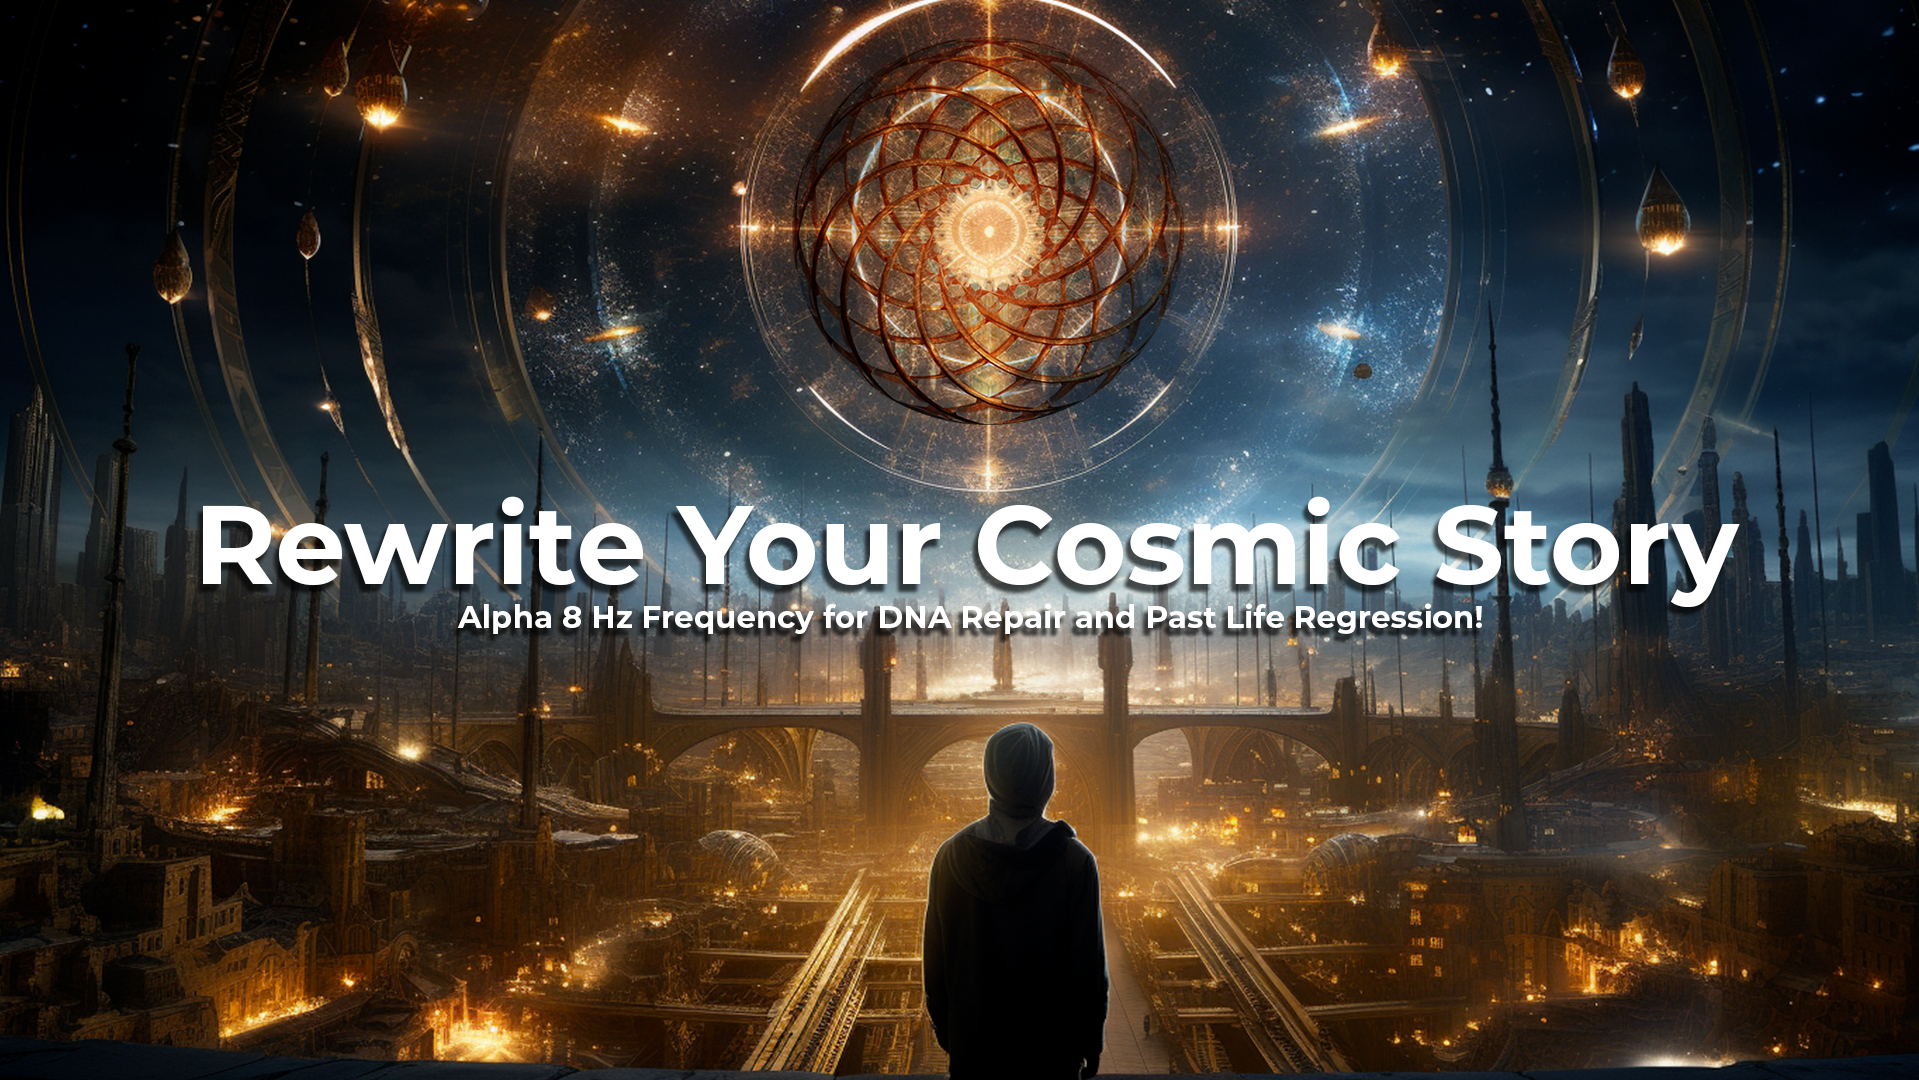 Rewrite Your Cosmic Story: Alpha 8 Hz Frequency for DNA Repair and Past Life Regression